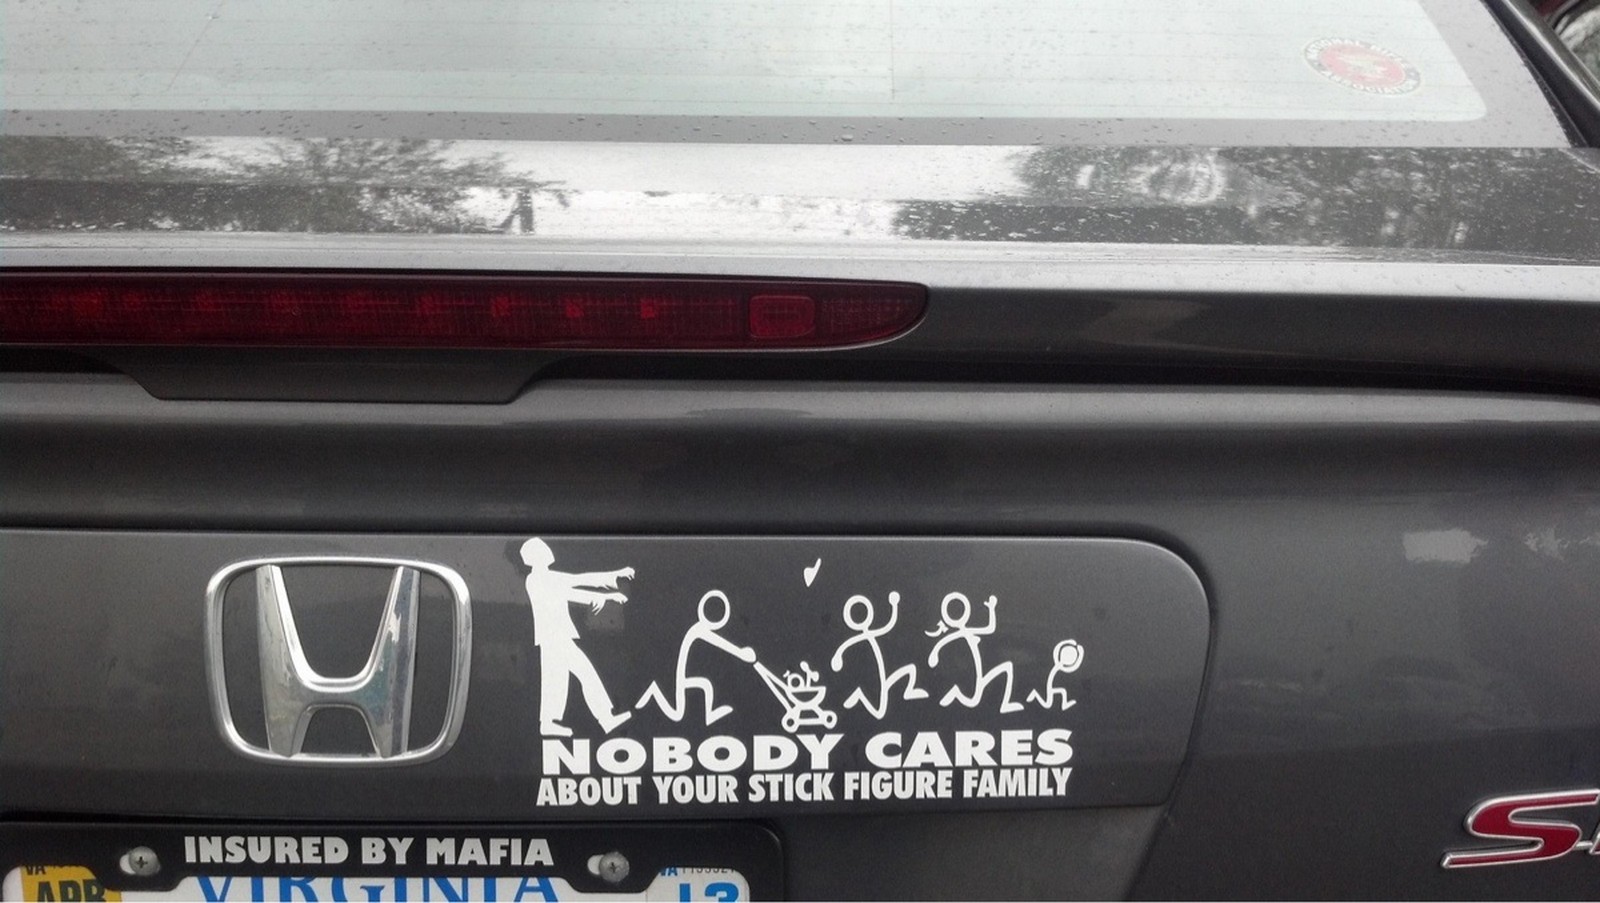 27 Funny Bumper Stickers - Funny bumper stickers like this one are so true.